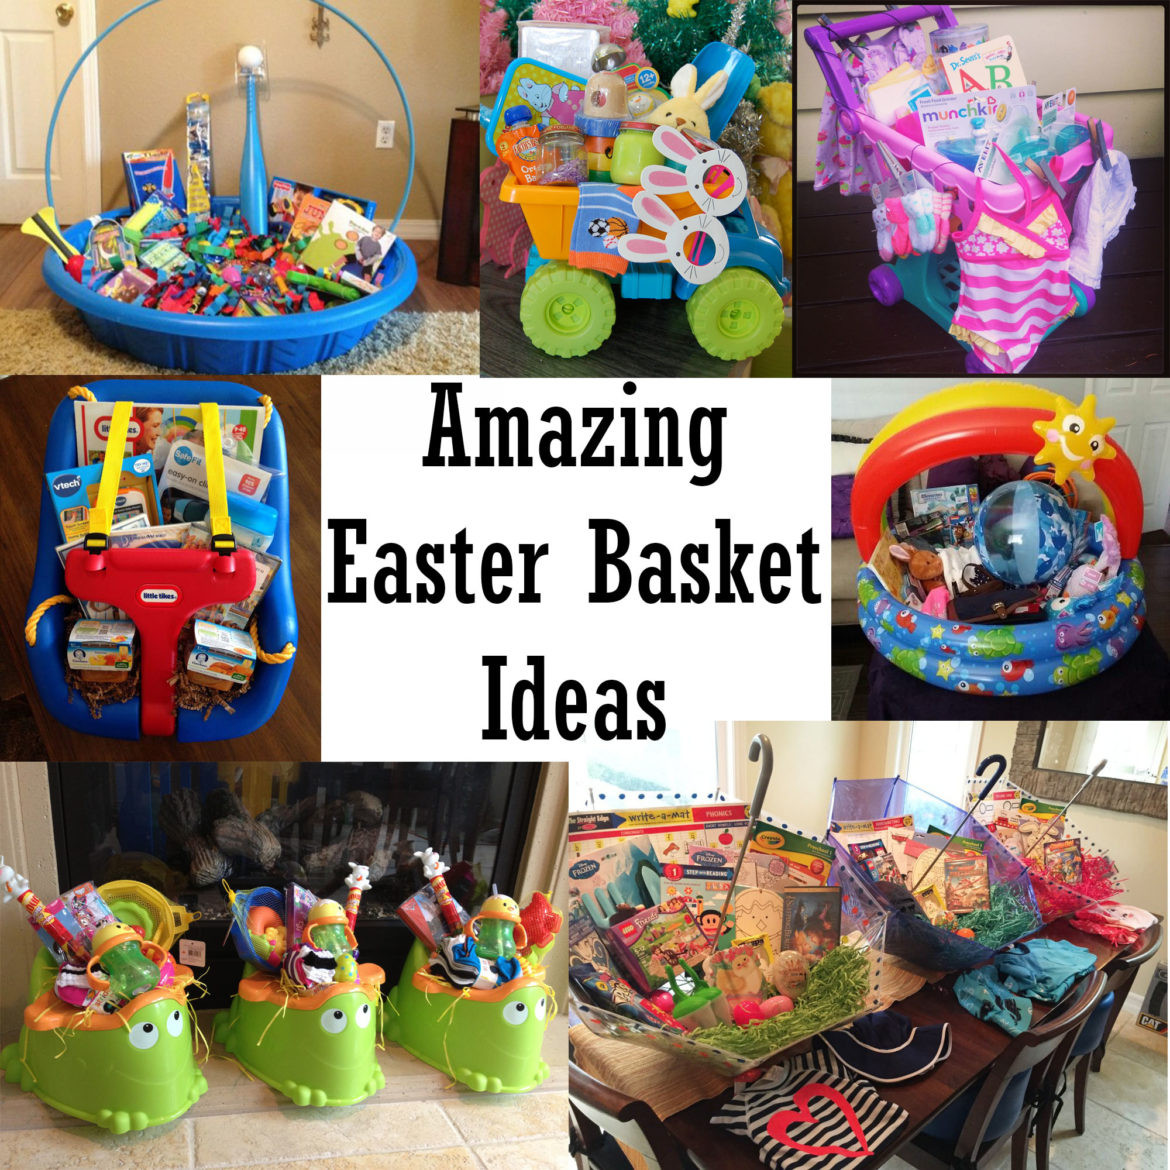 Easter Basket Ideas
 Amazing Easter Basket Ideas The Keeper of the Cheerios